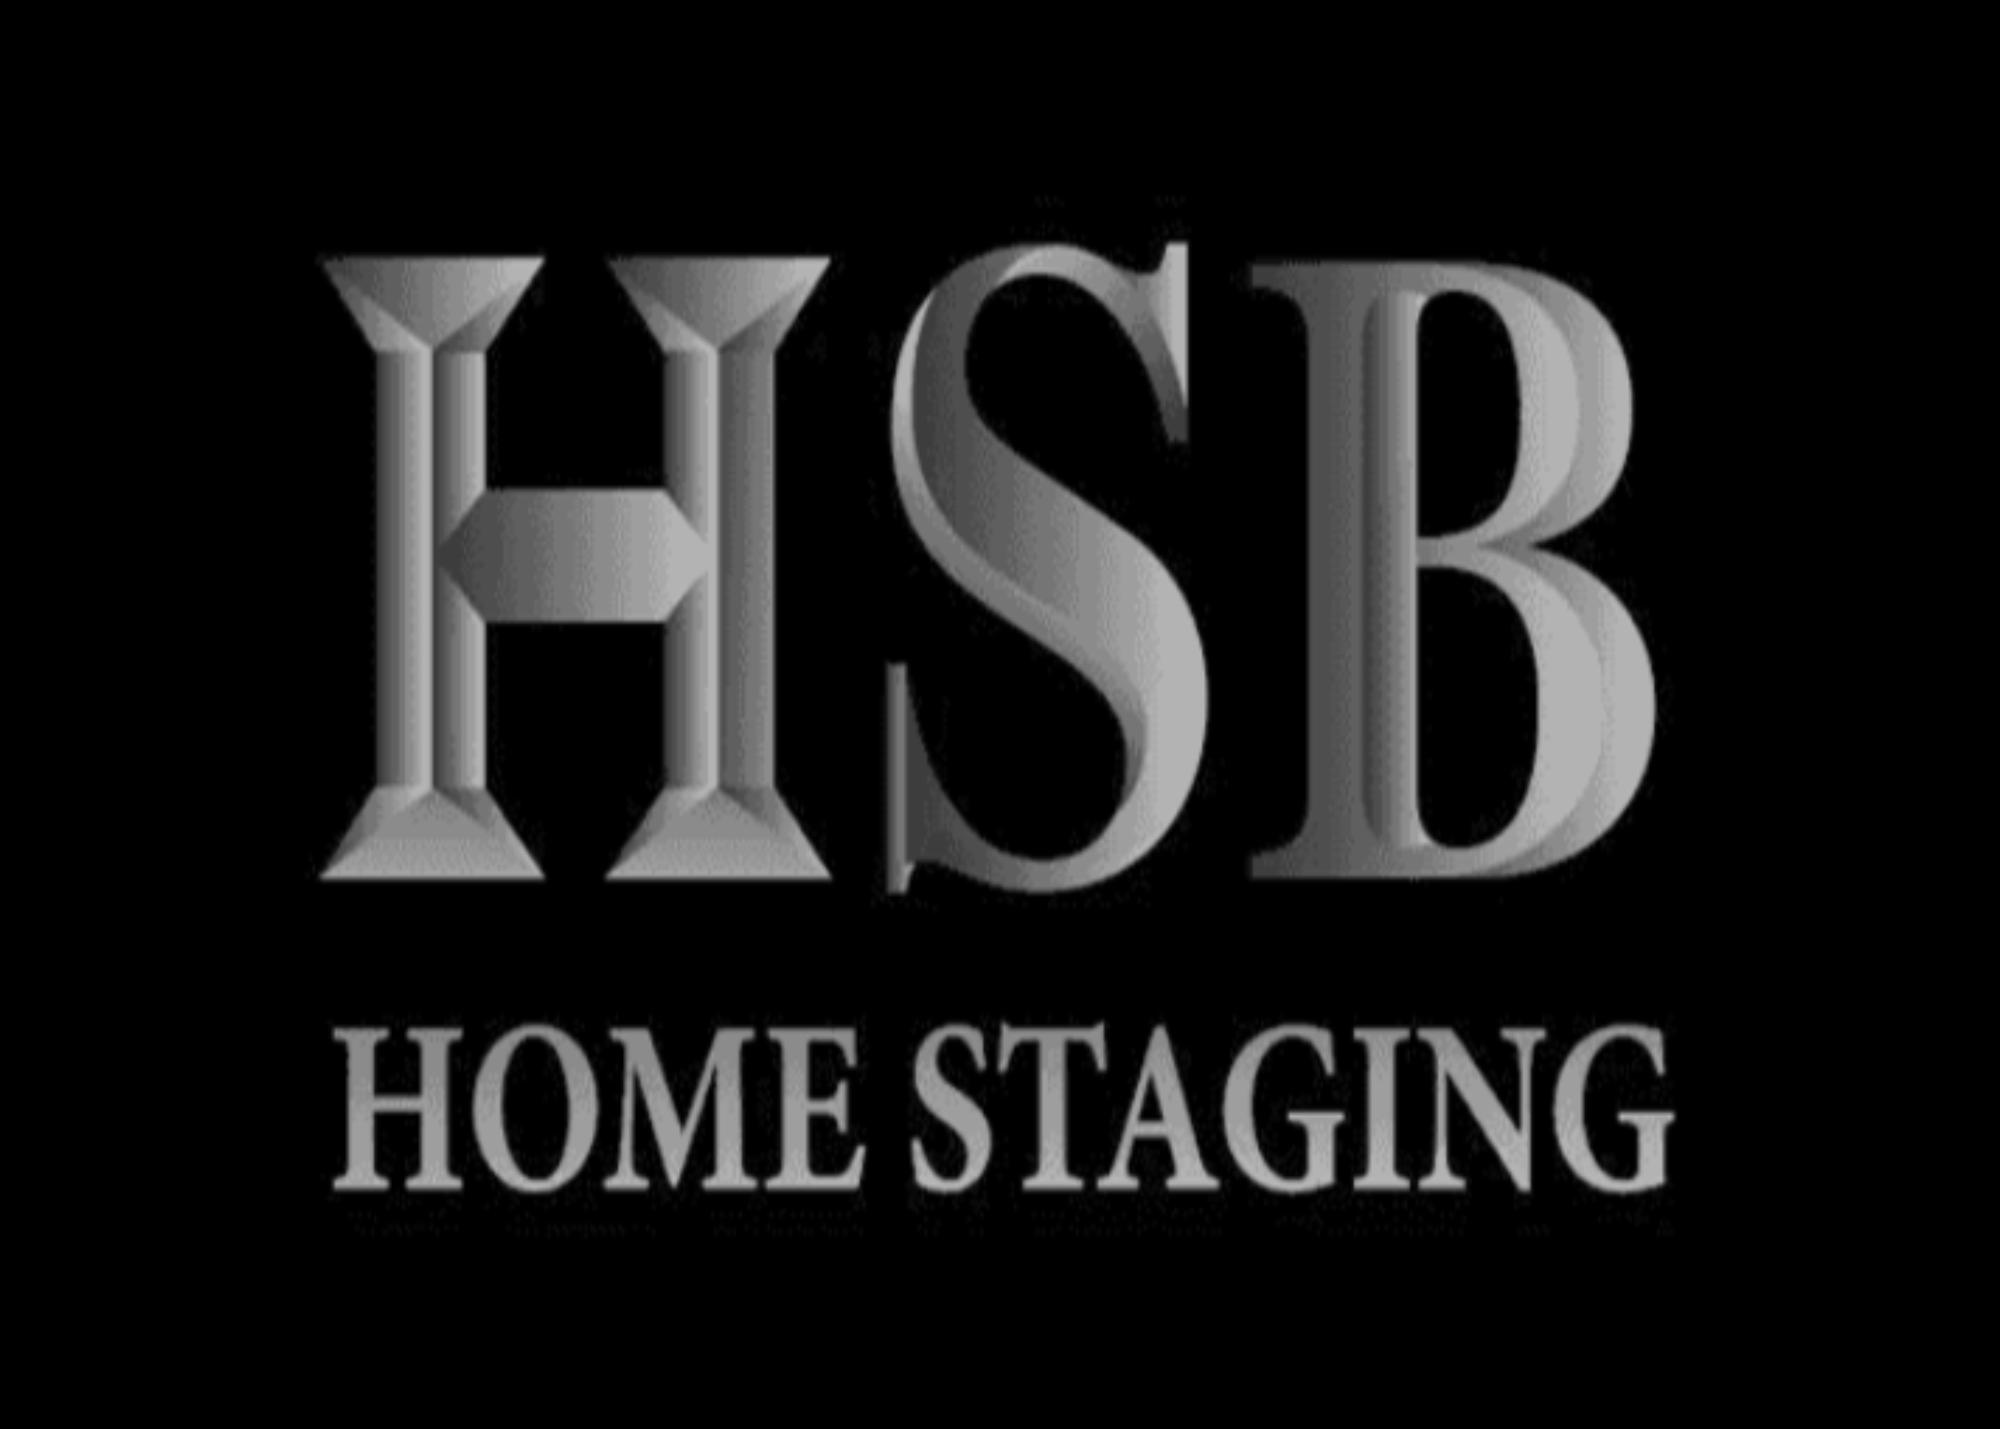 HSB Home Staging